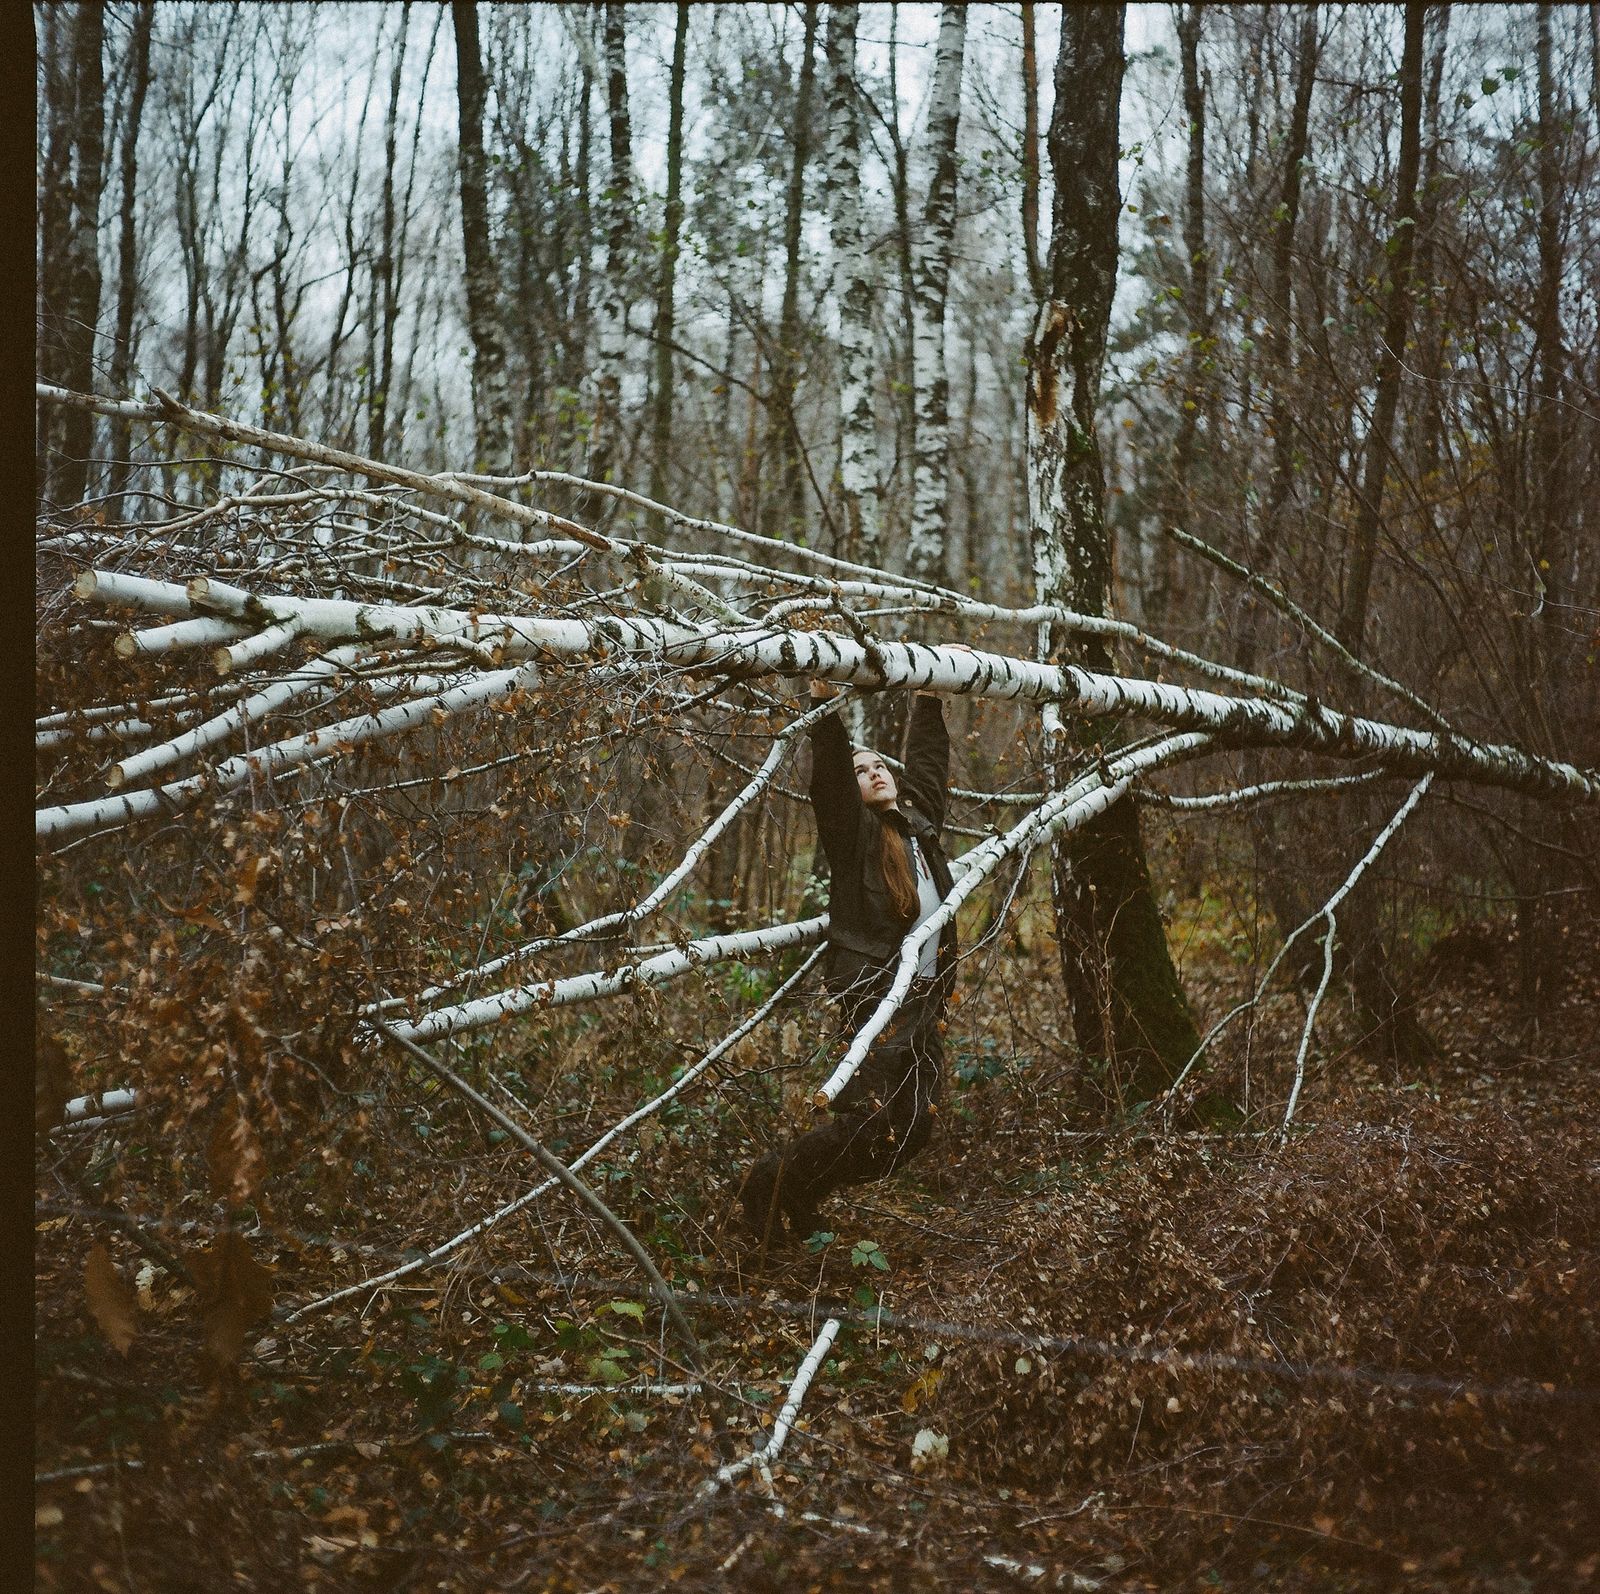 © Laura Pannack - Image from the Chapter 2- Tales from The Dübener Heide photography project